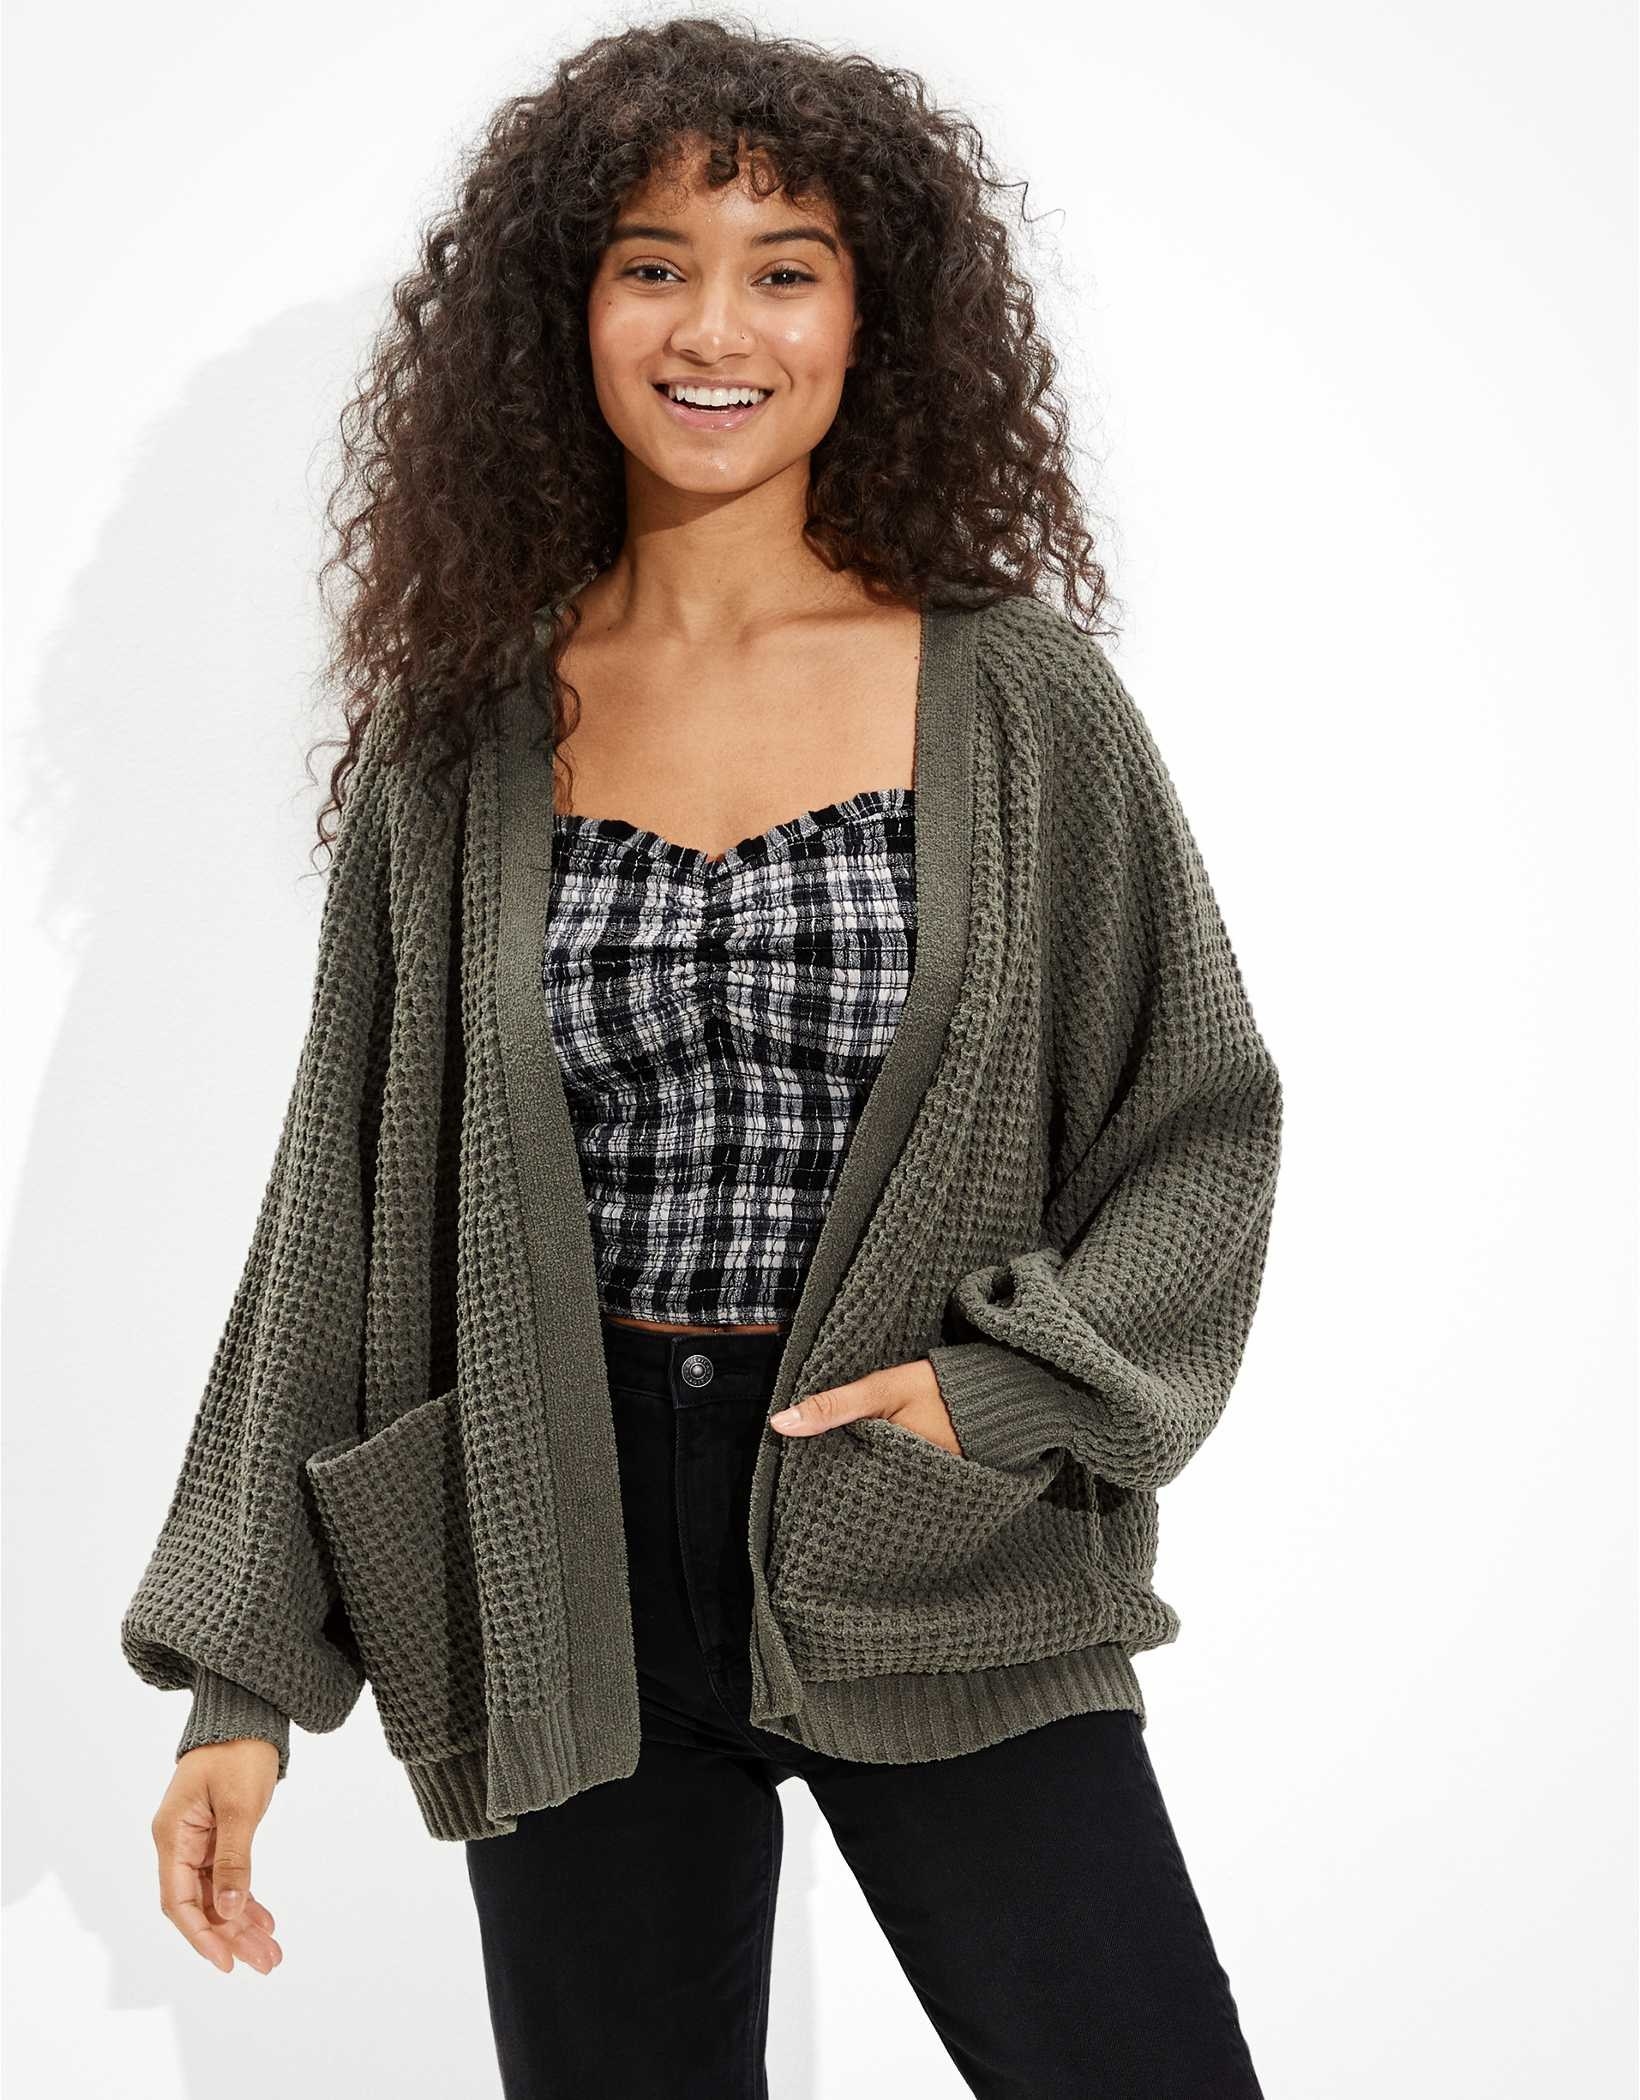 A model wearing an olive oversized chenille cardigan